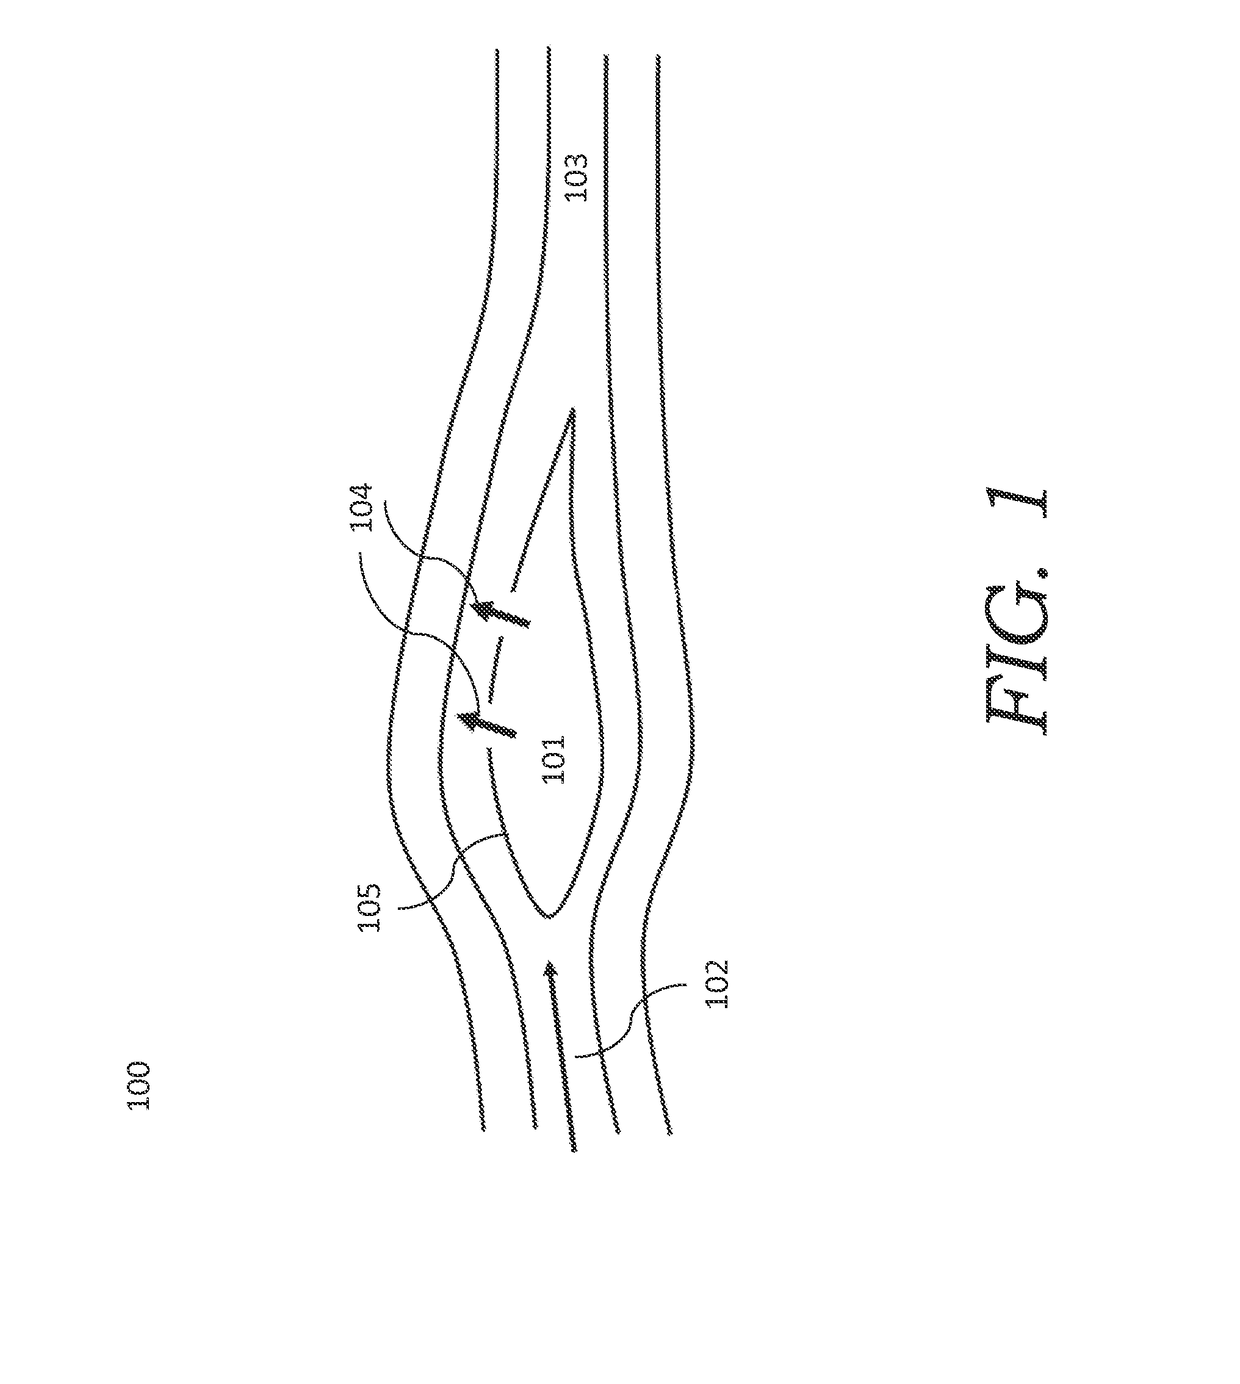 Fluid flow energy extraction system and method related thereto